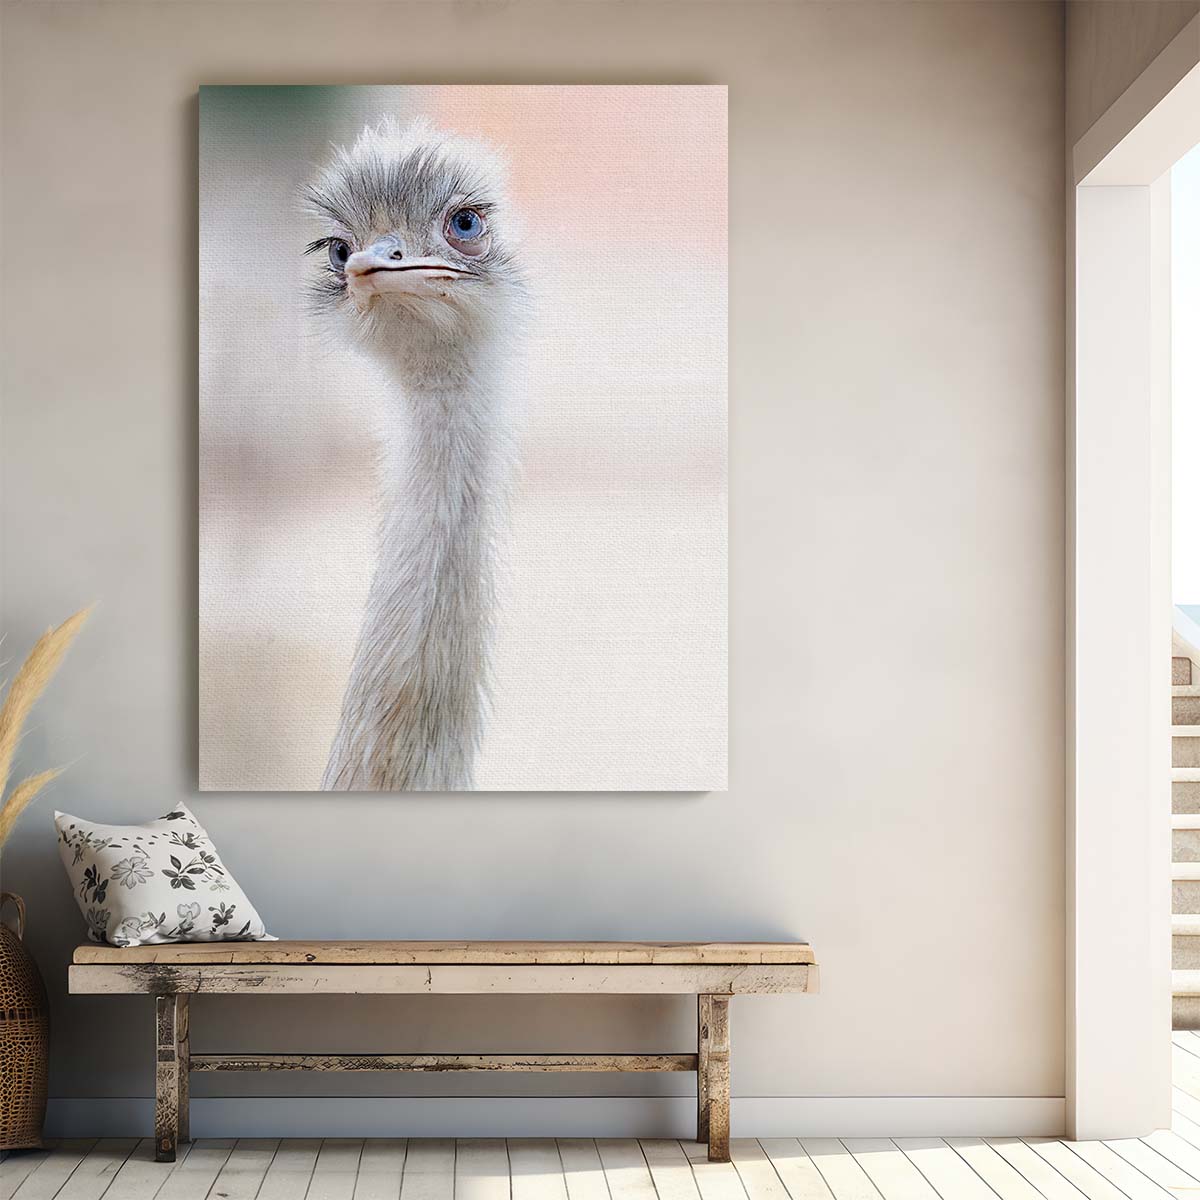 Bokeh Photography Ostrich Bird Animal Portrait with Blue Eyes by Luxuriance Designs, made in USA